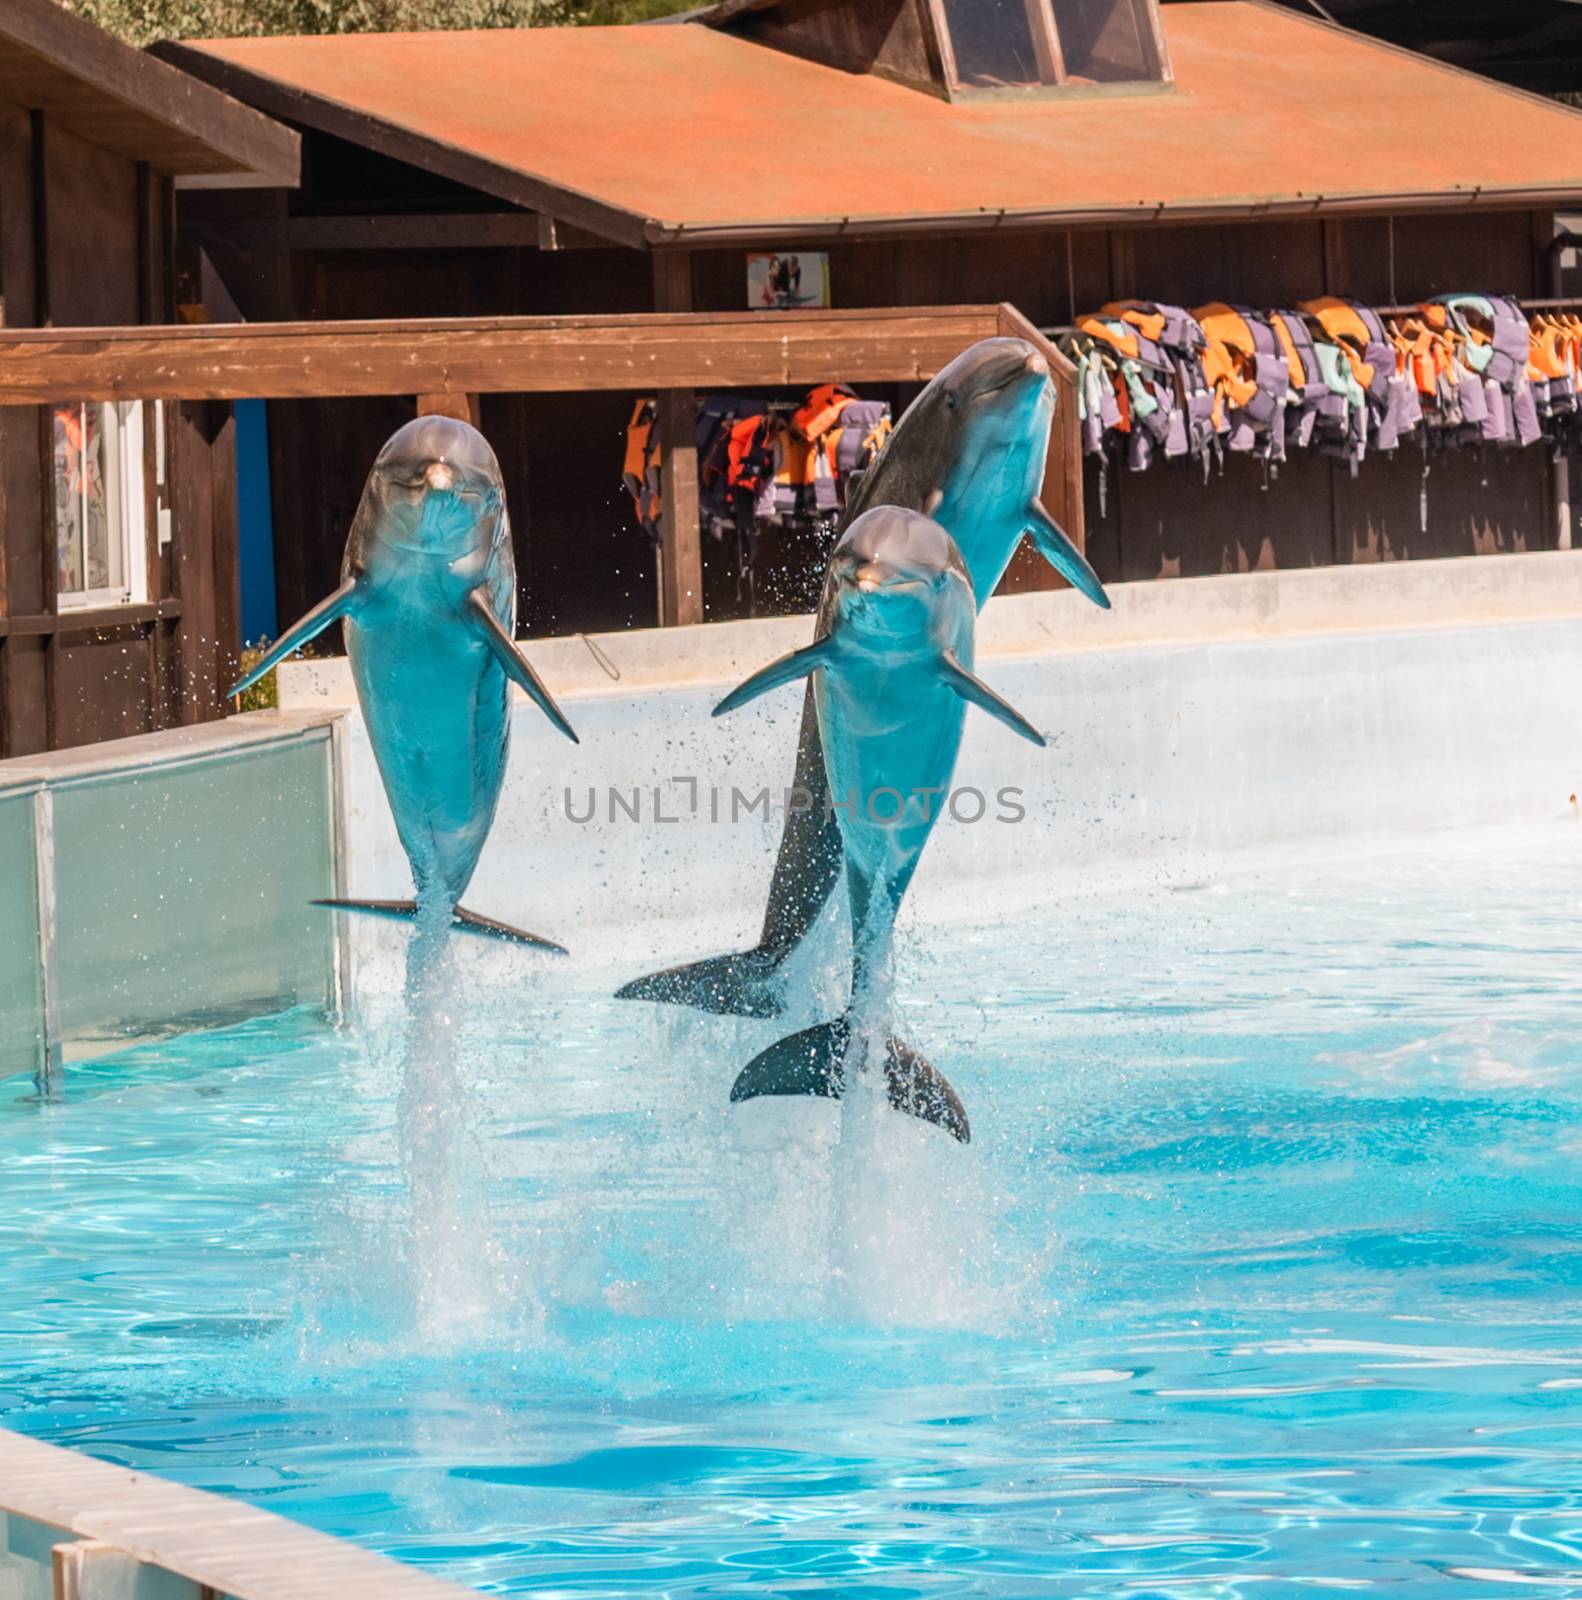 Three beautiful dolphins jumping in a swimming pool showing their acrobatic abilities